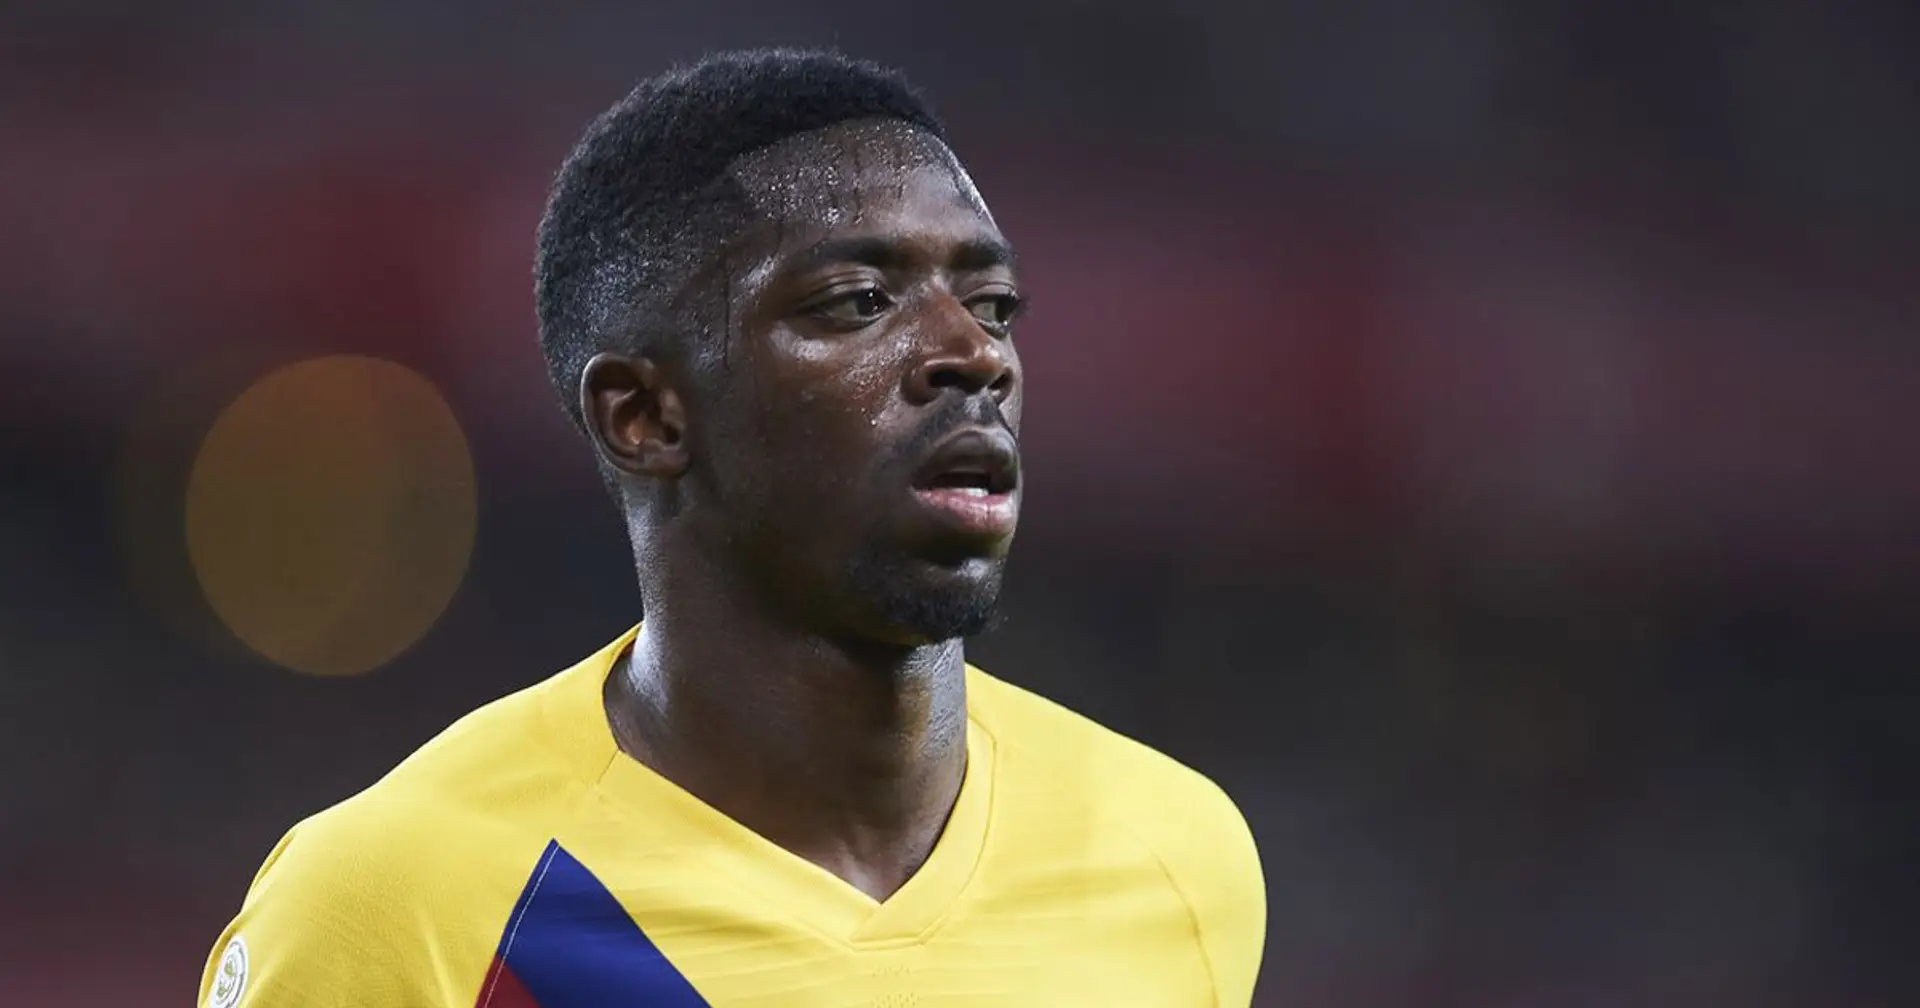 Conservative treatment doesn't help Dembele, player still finishes games with discomfort: Sport